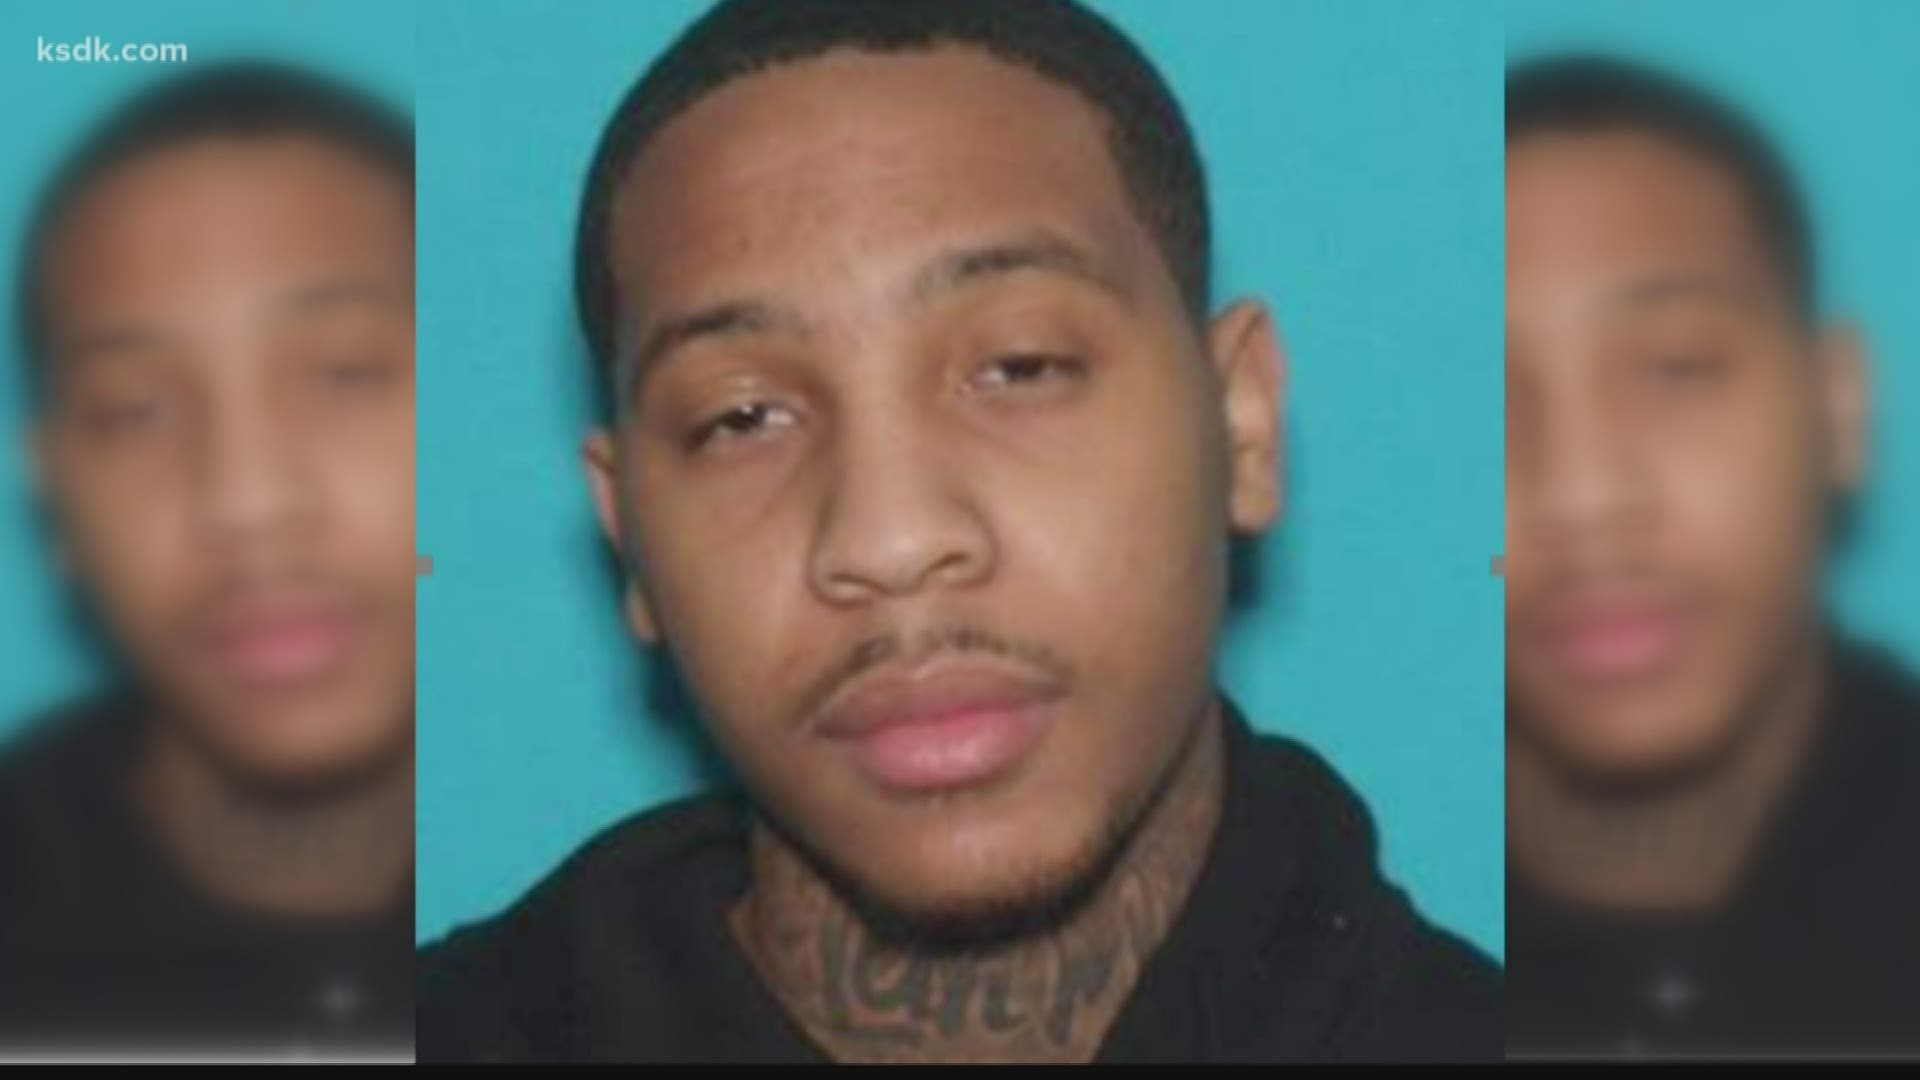 He has been identified as 20-year-old Marvin L. Davis. Police said they are looking for two people in a black SUV connected to the shooting.